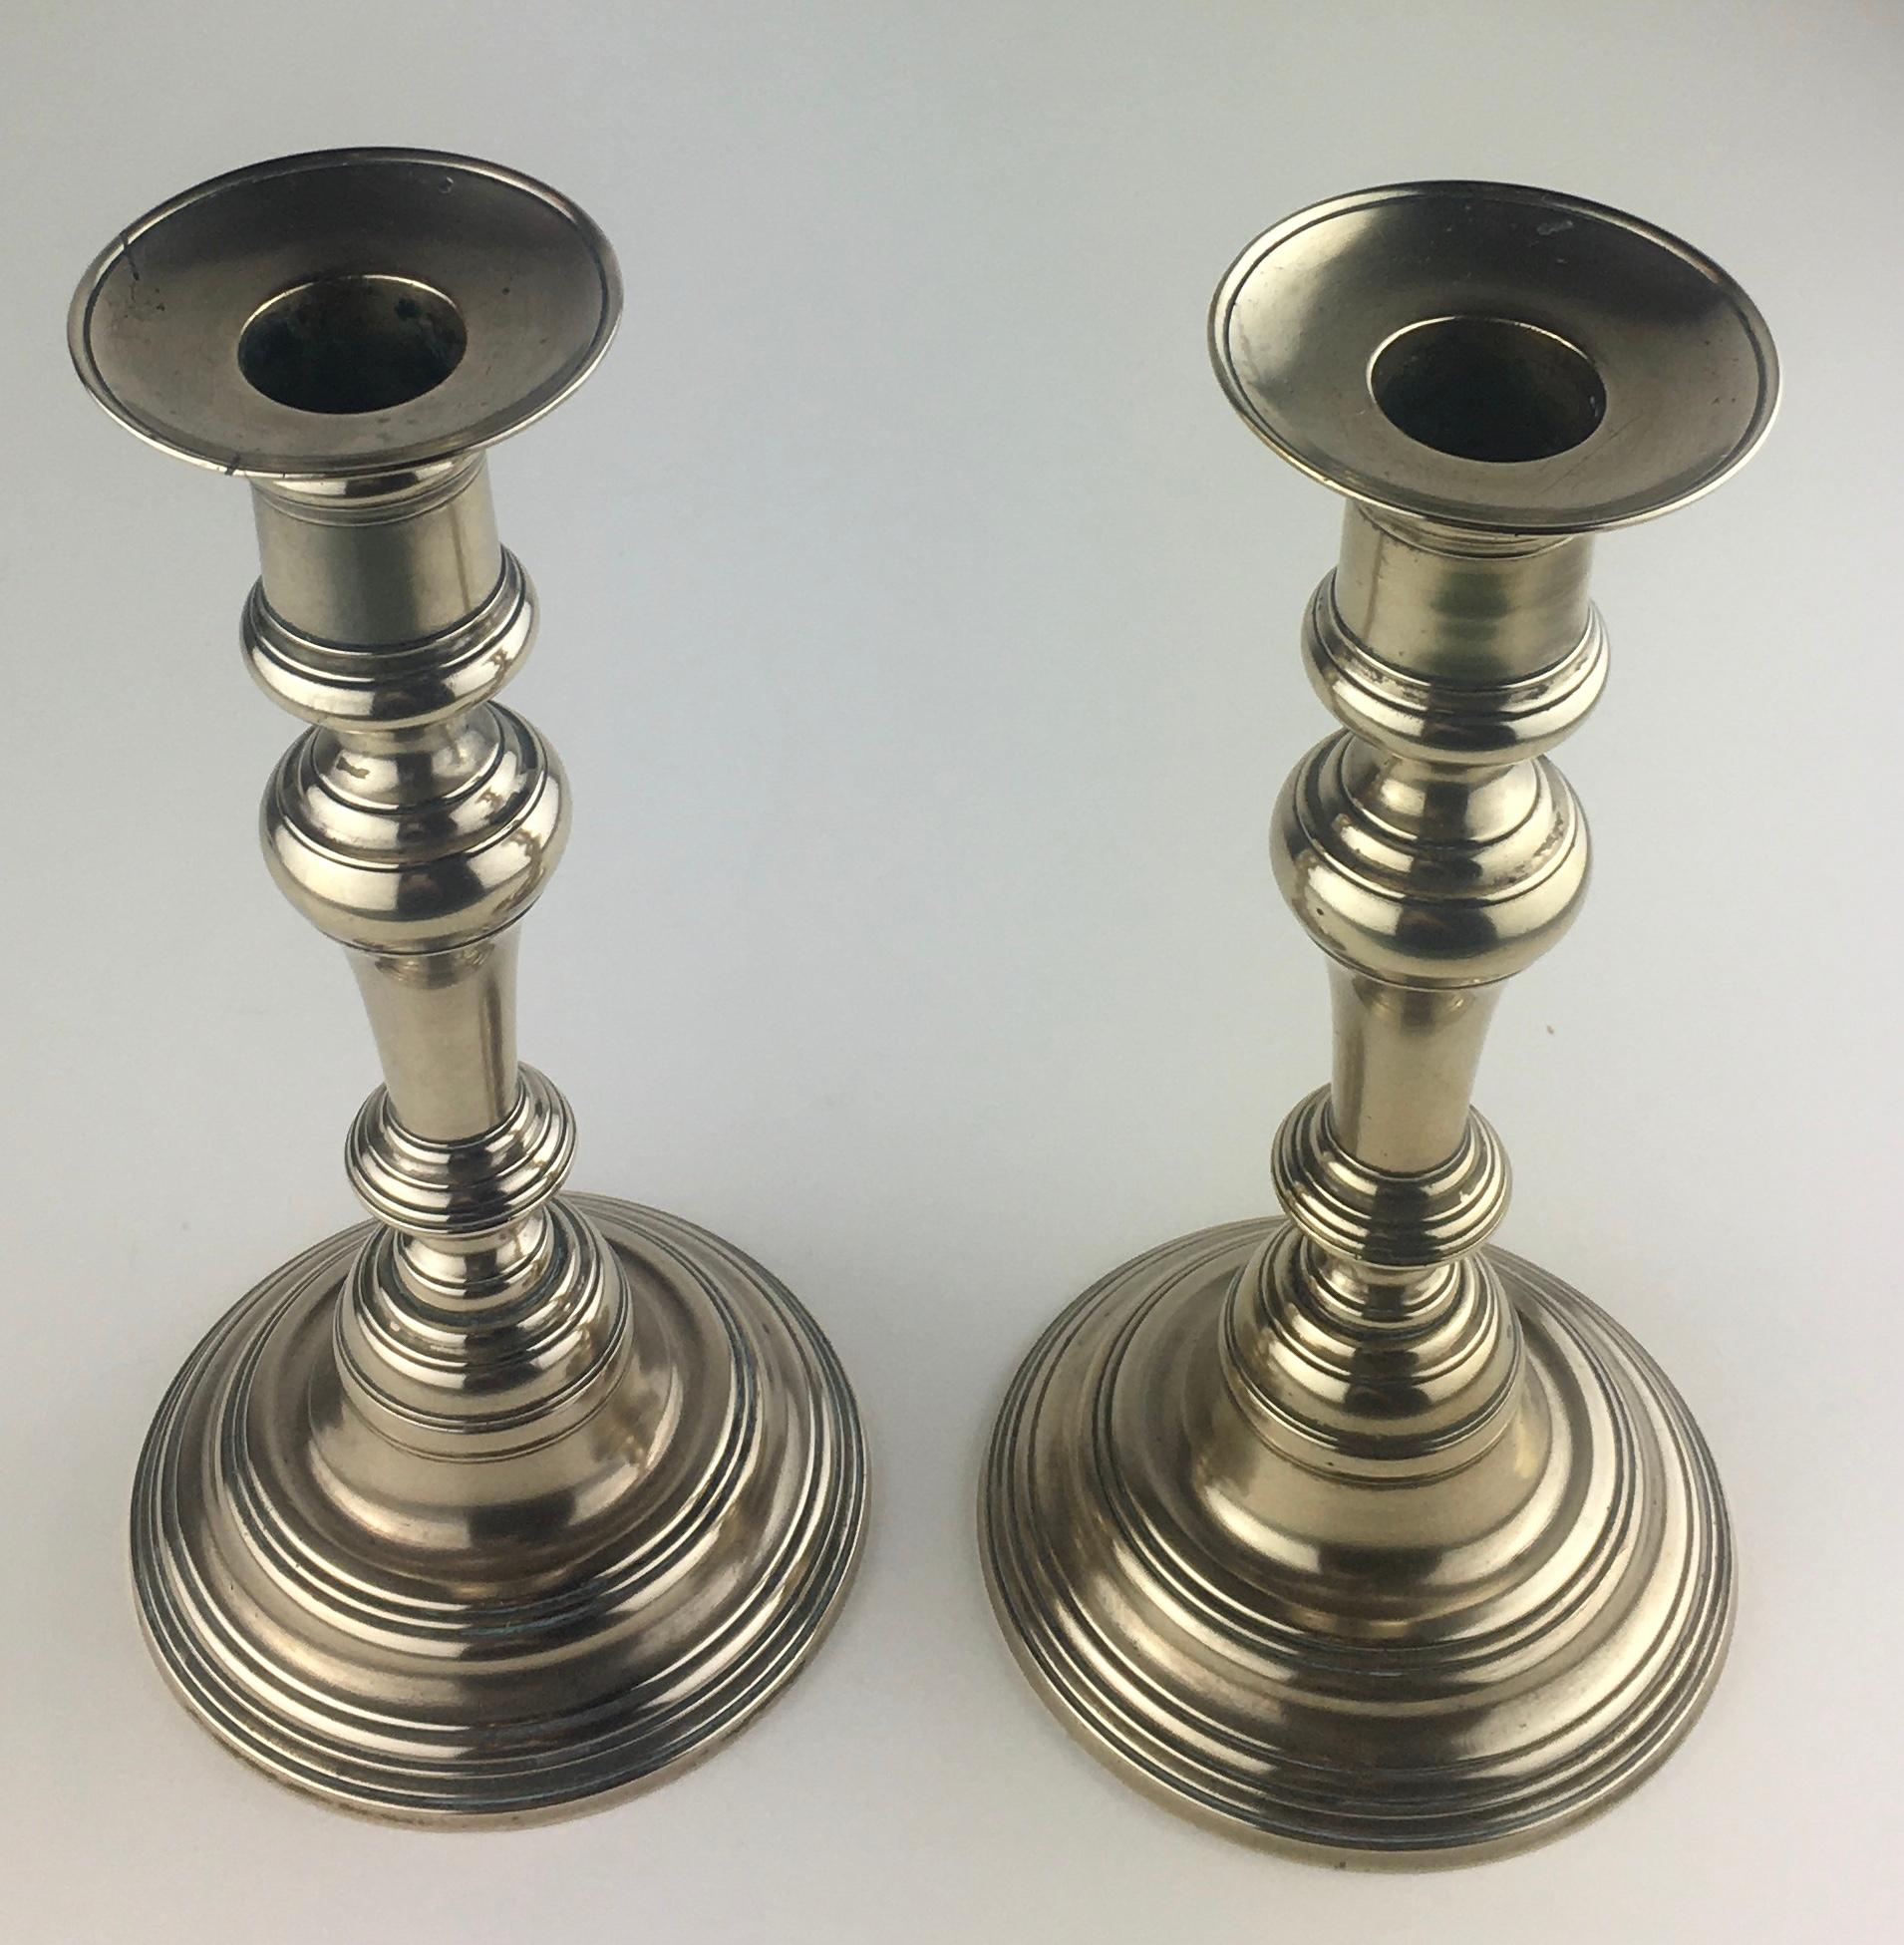 Charming pair of French solid brass candlesticks. 
These simple yet beautifully detailed items will enhance any coffee, cocktail or bedside table. 

Very good condition overall. One base has been drilled to convert into a table lamp and the bobeches